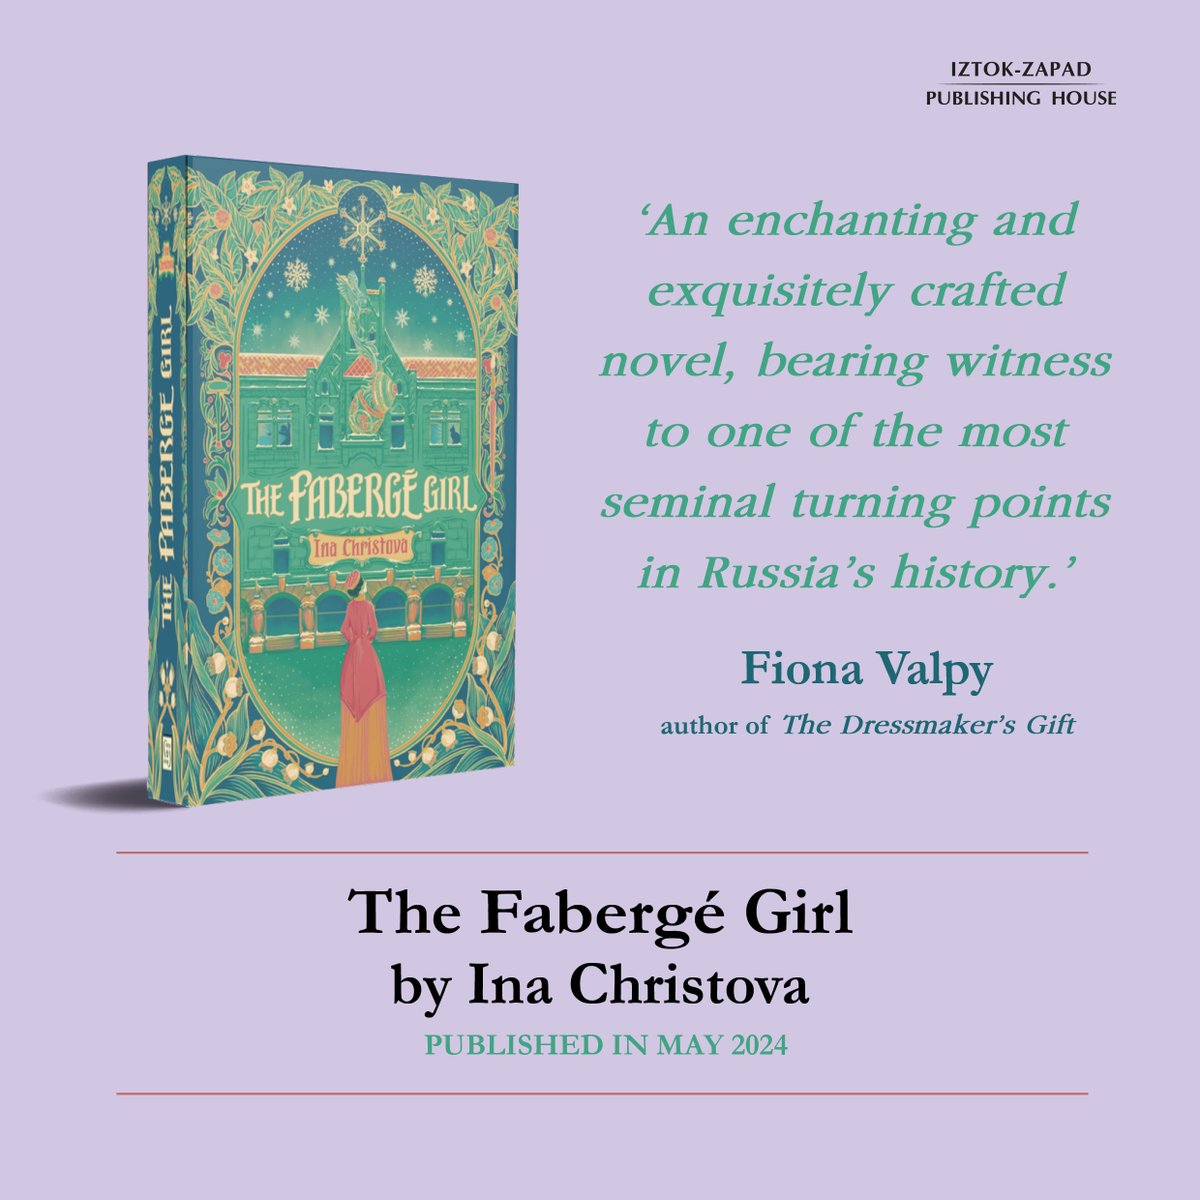 We're not the only ones who can't wait for #TheFabergeGirl! 

Bestselling author Fiona Valpy said it is 'an enchanting and exquisitely crafted novel, bearing witness to one of the most seminal turning points in Russia's history.' 

We couldn't have said it better ourselves!🎉🌟